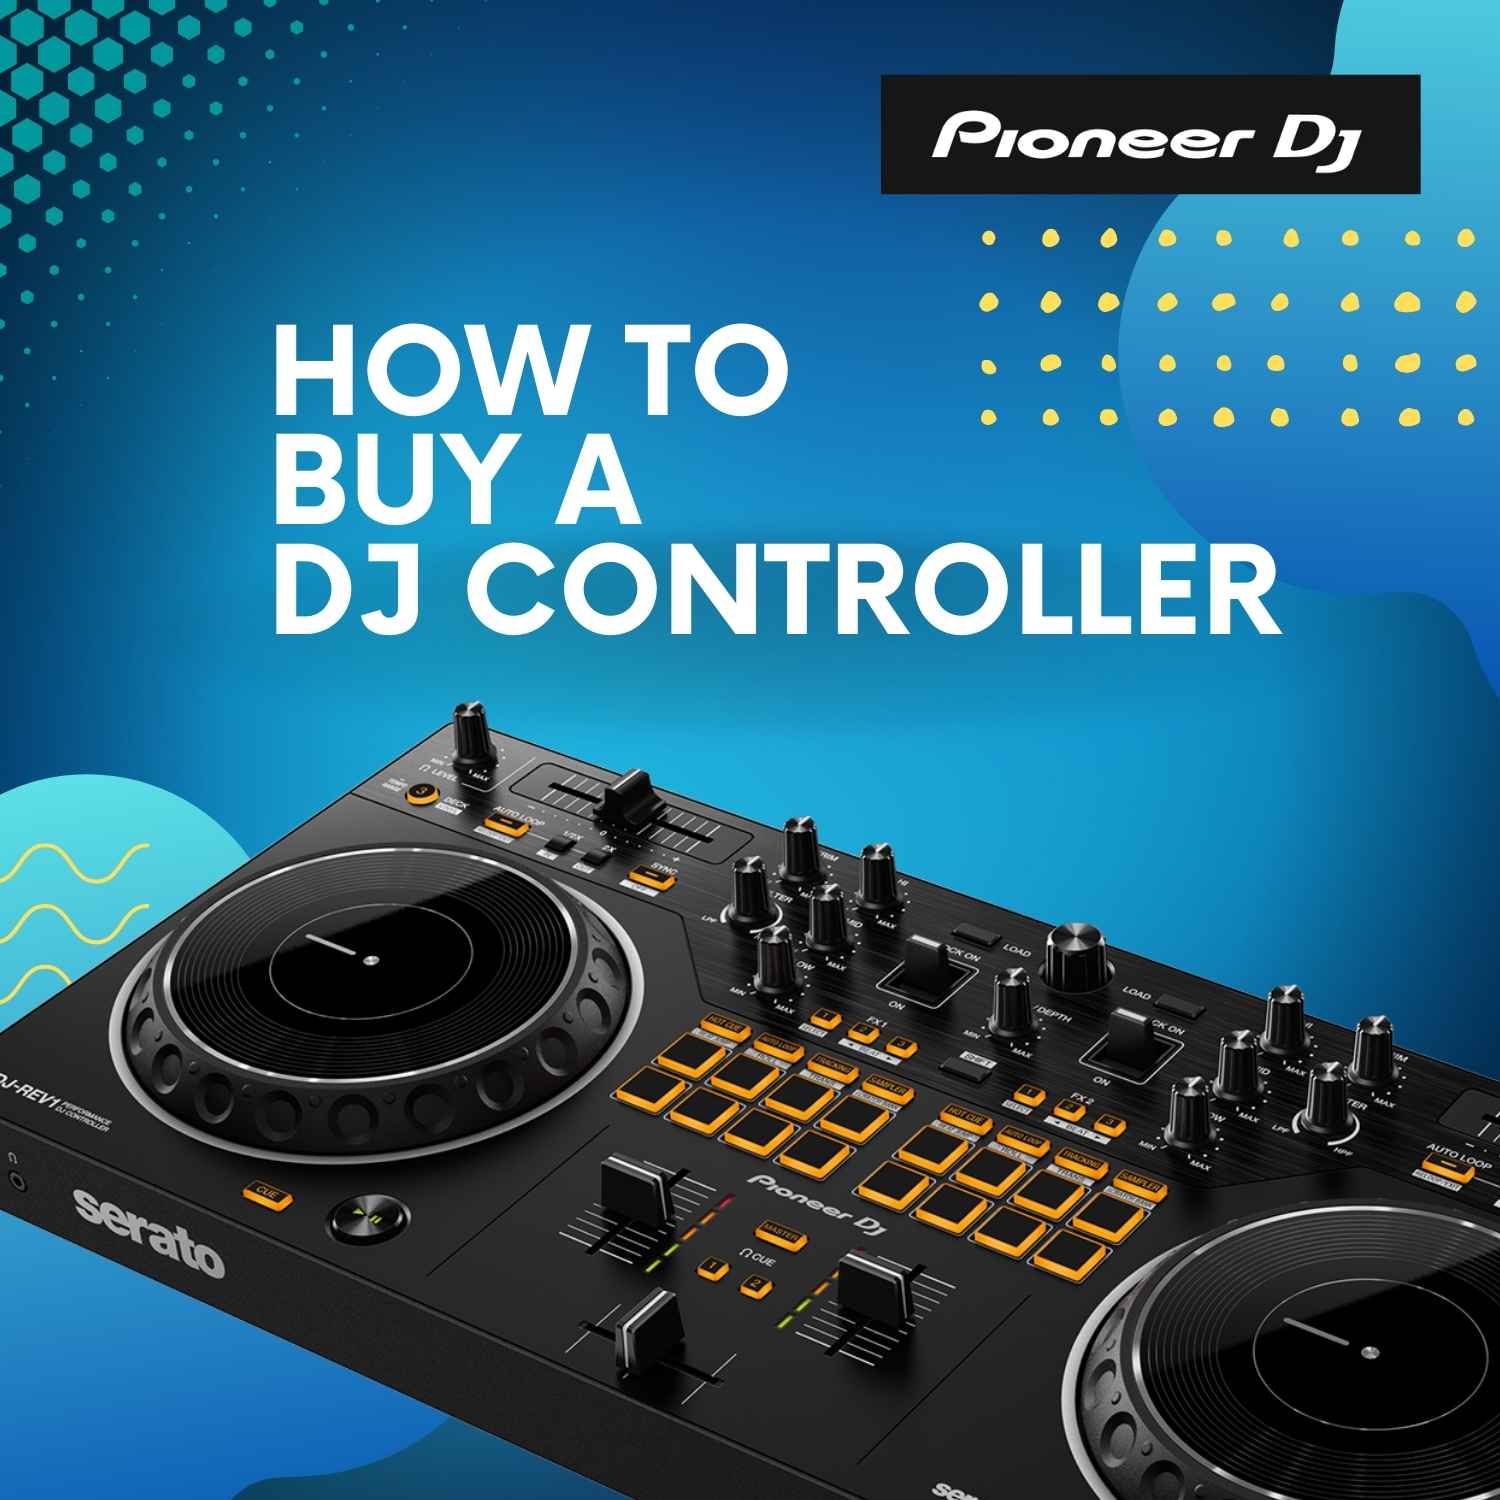 How to buy a new DJ Controller - Top 10 questions answered